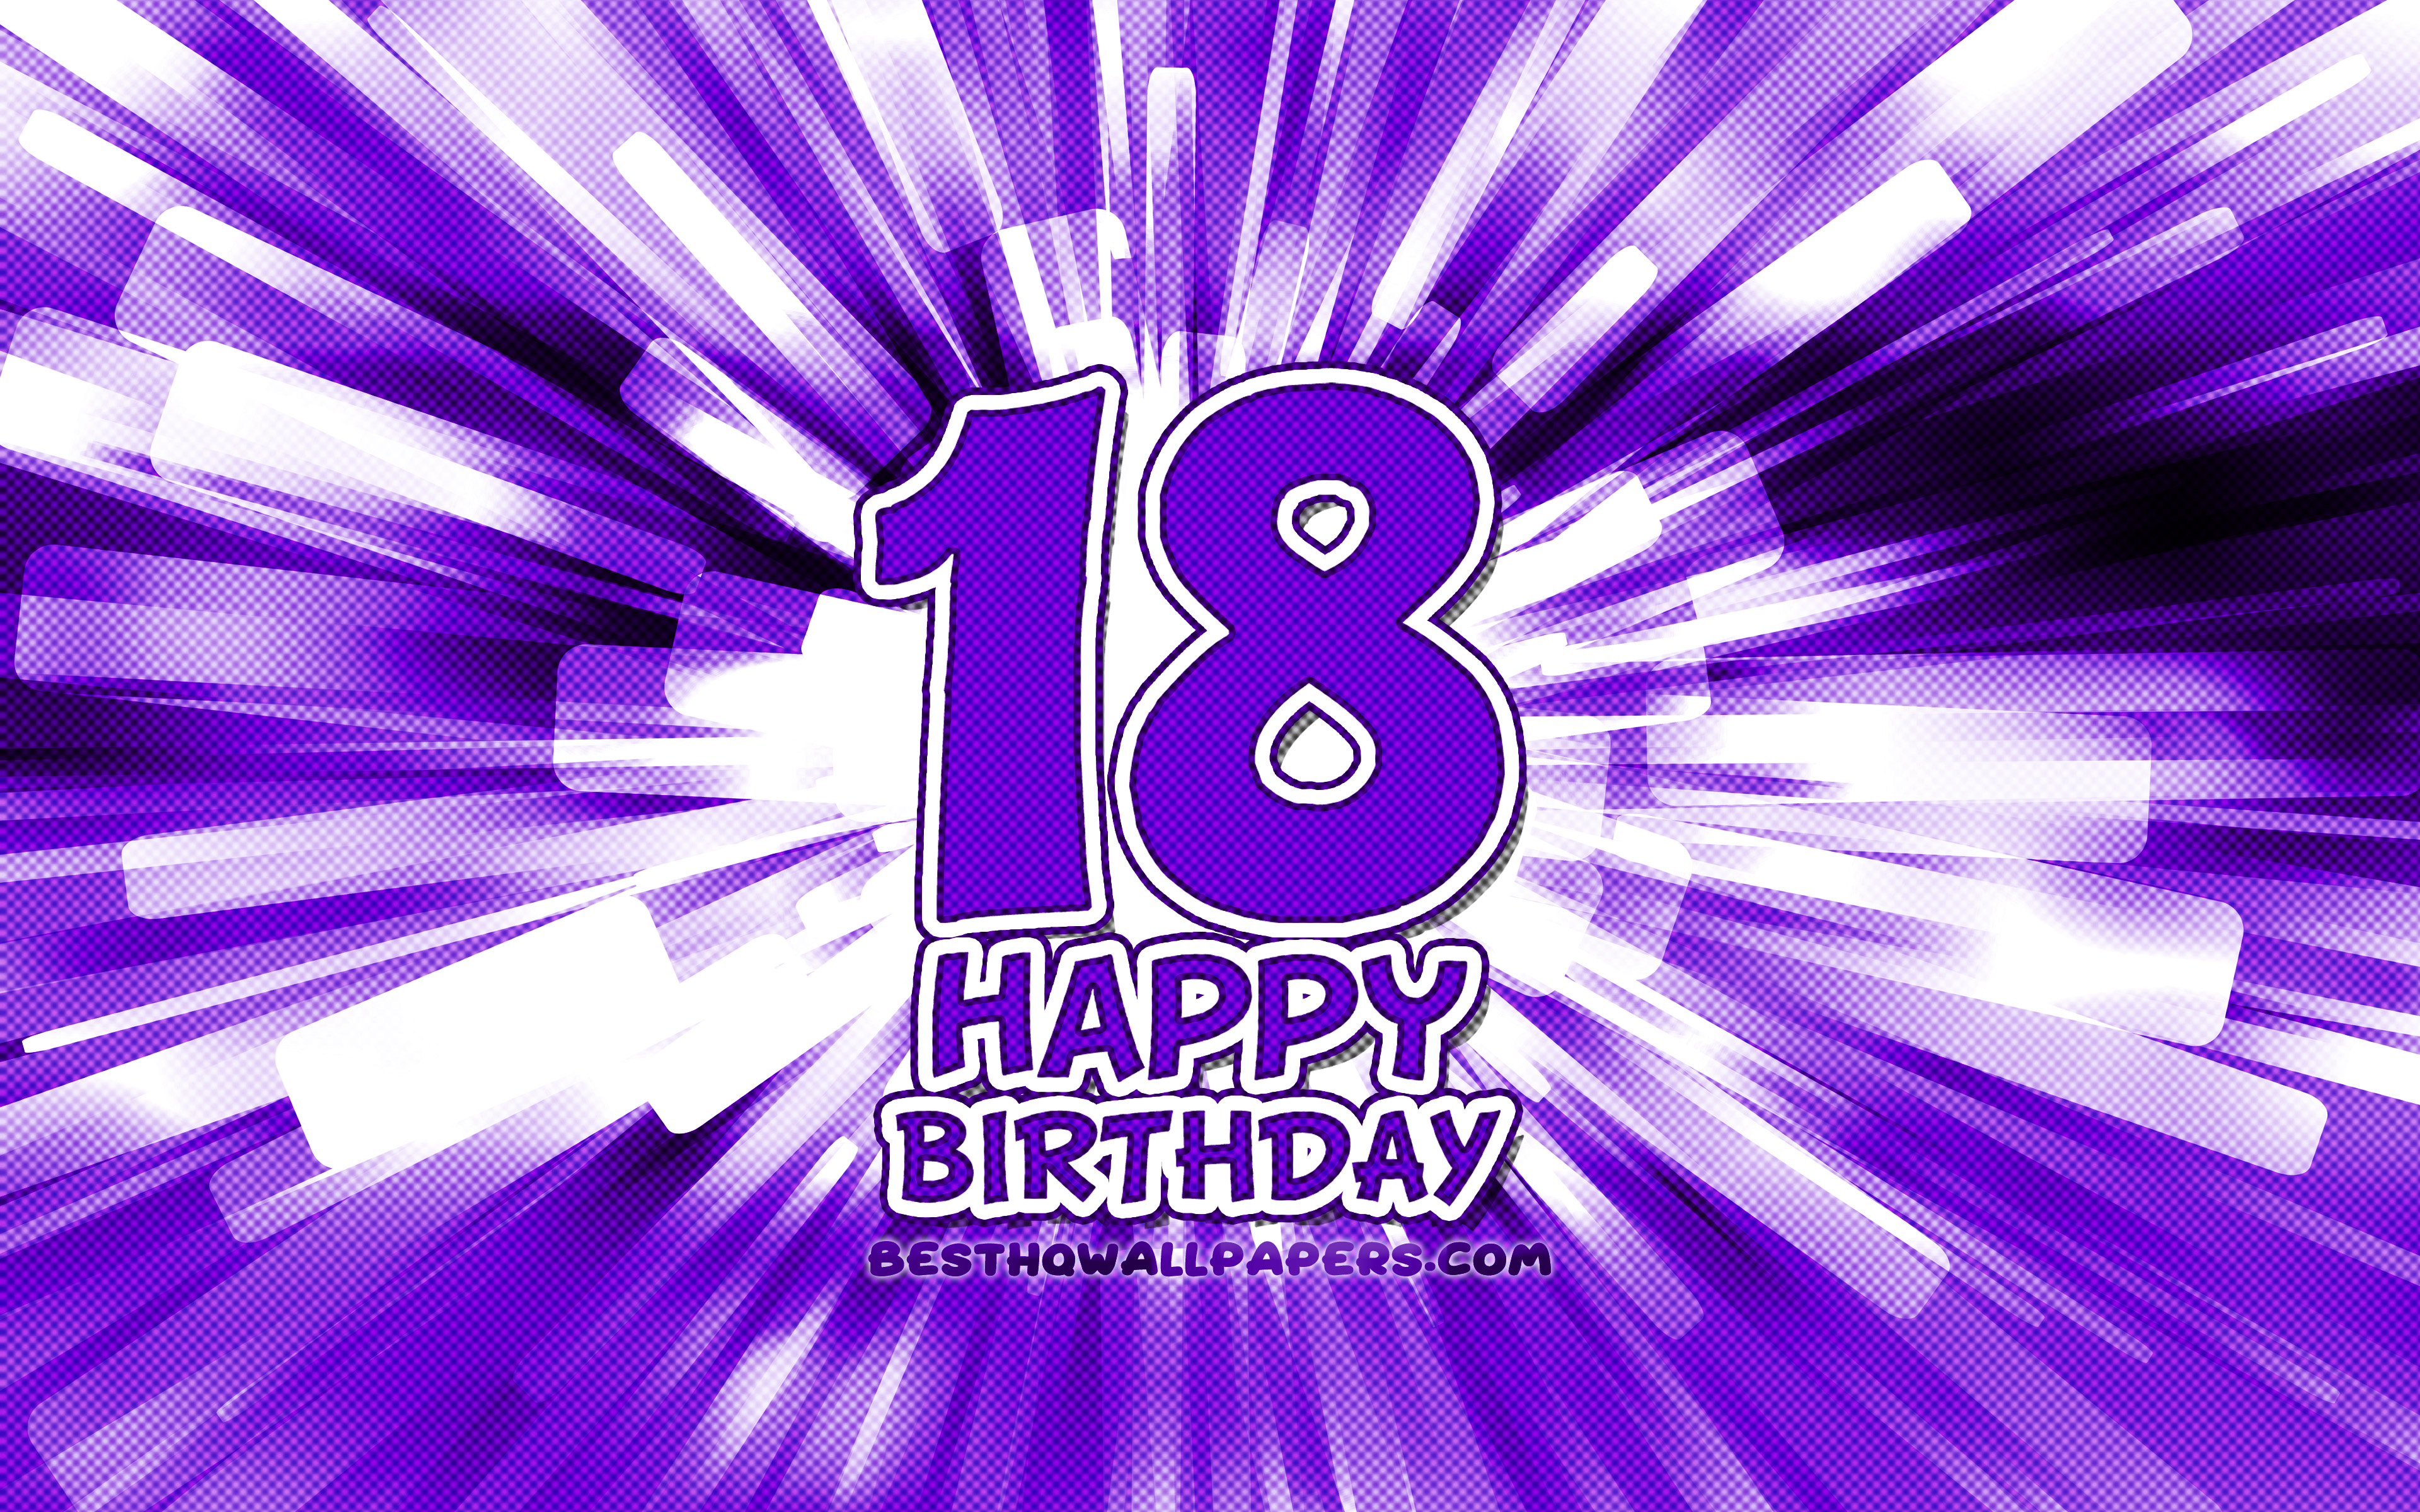 Download wallpaper Happy 18th birthday, 4k, violet abstract rays, Birthday Party, creative, Happy 18 Years Birthday, 18th Birthday Party, cartoon art, Birthday concept, 18th Birthday for desktop with resolution 3840x2400. High Quality